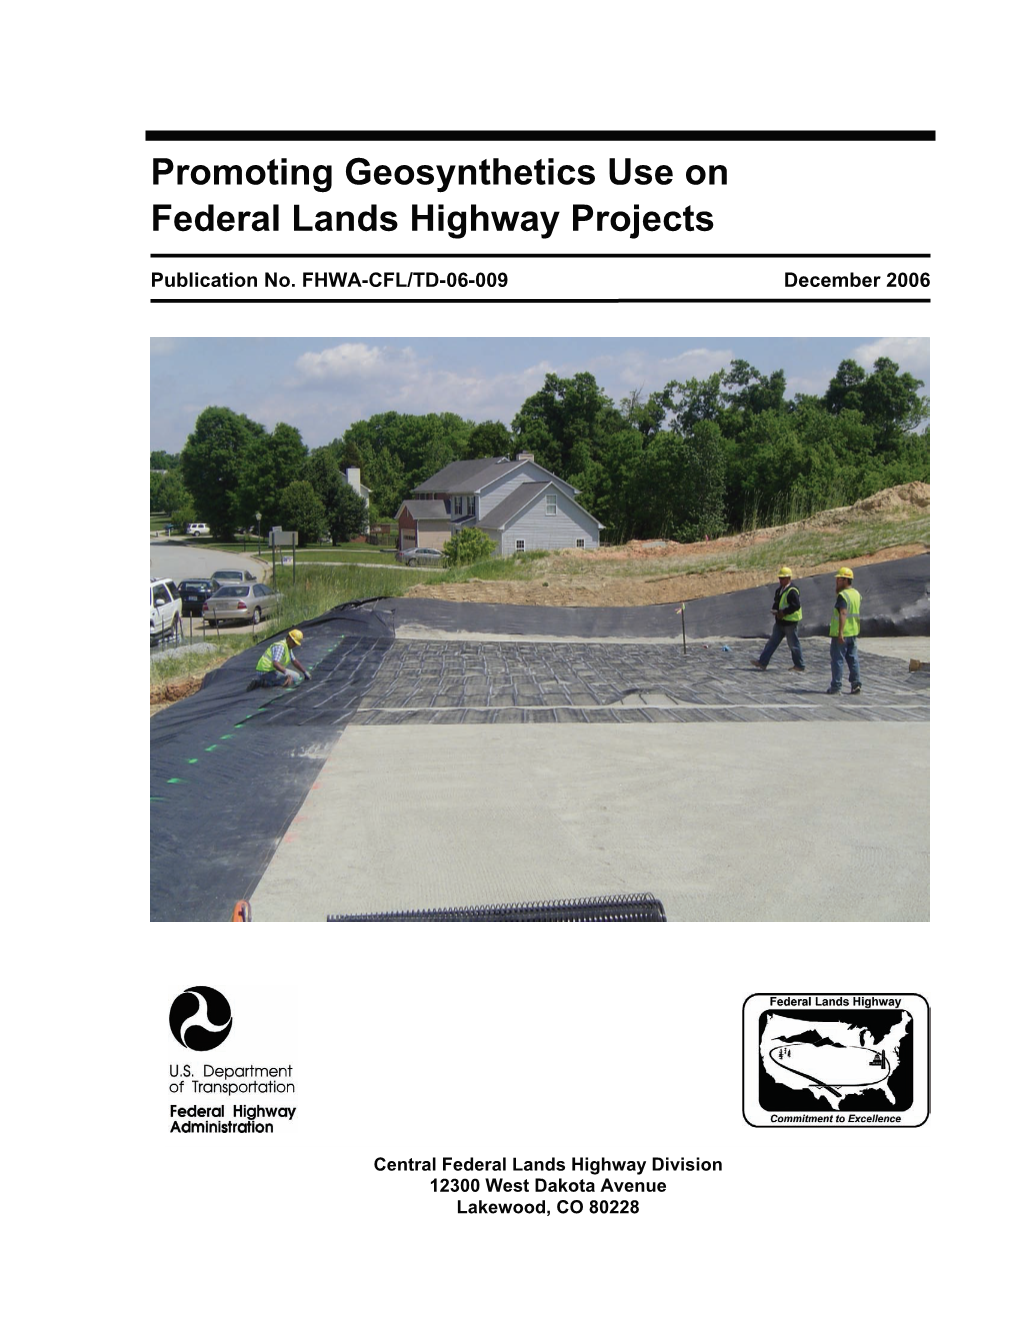 Promoting Geosynthetics Use on Federal Lands Highway Projects